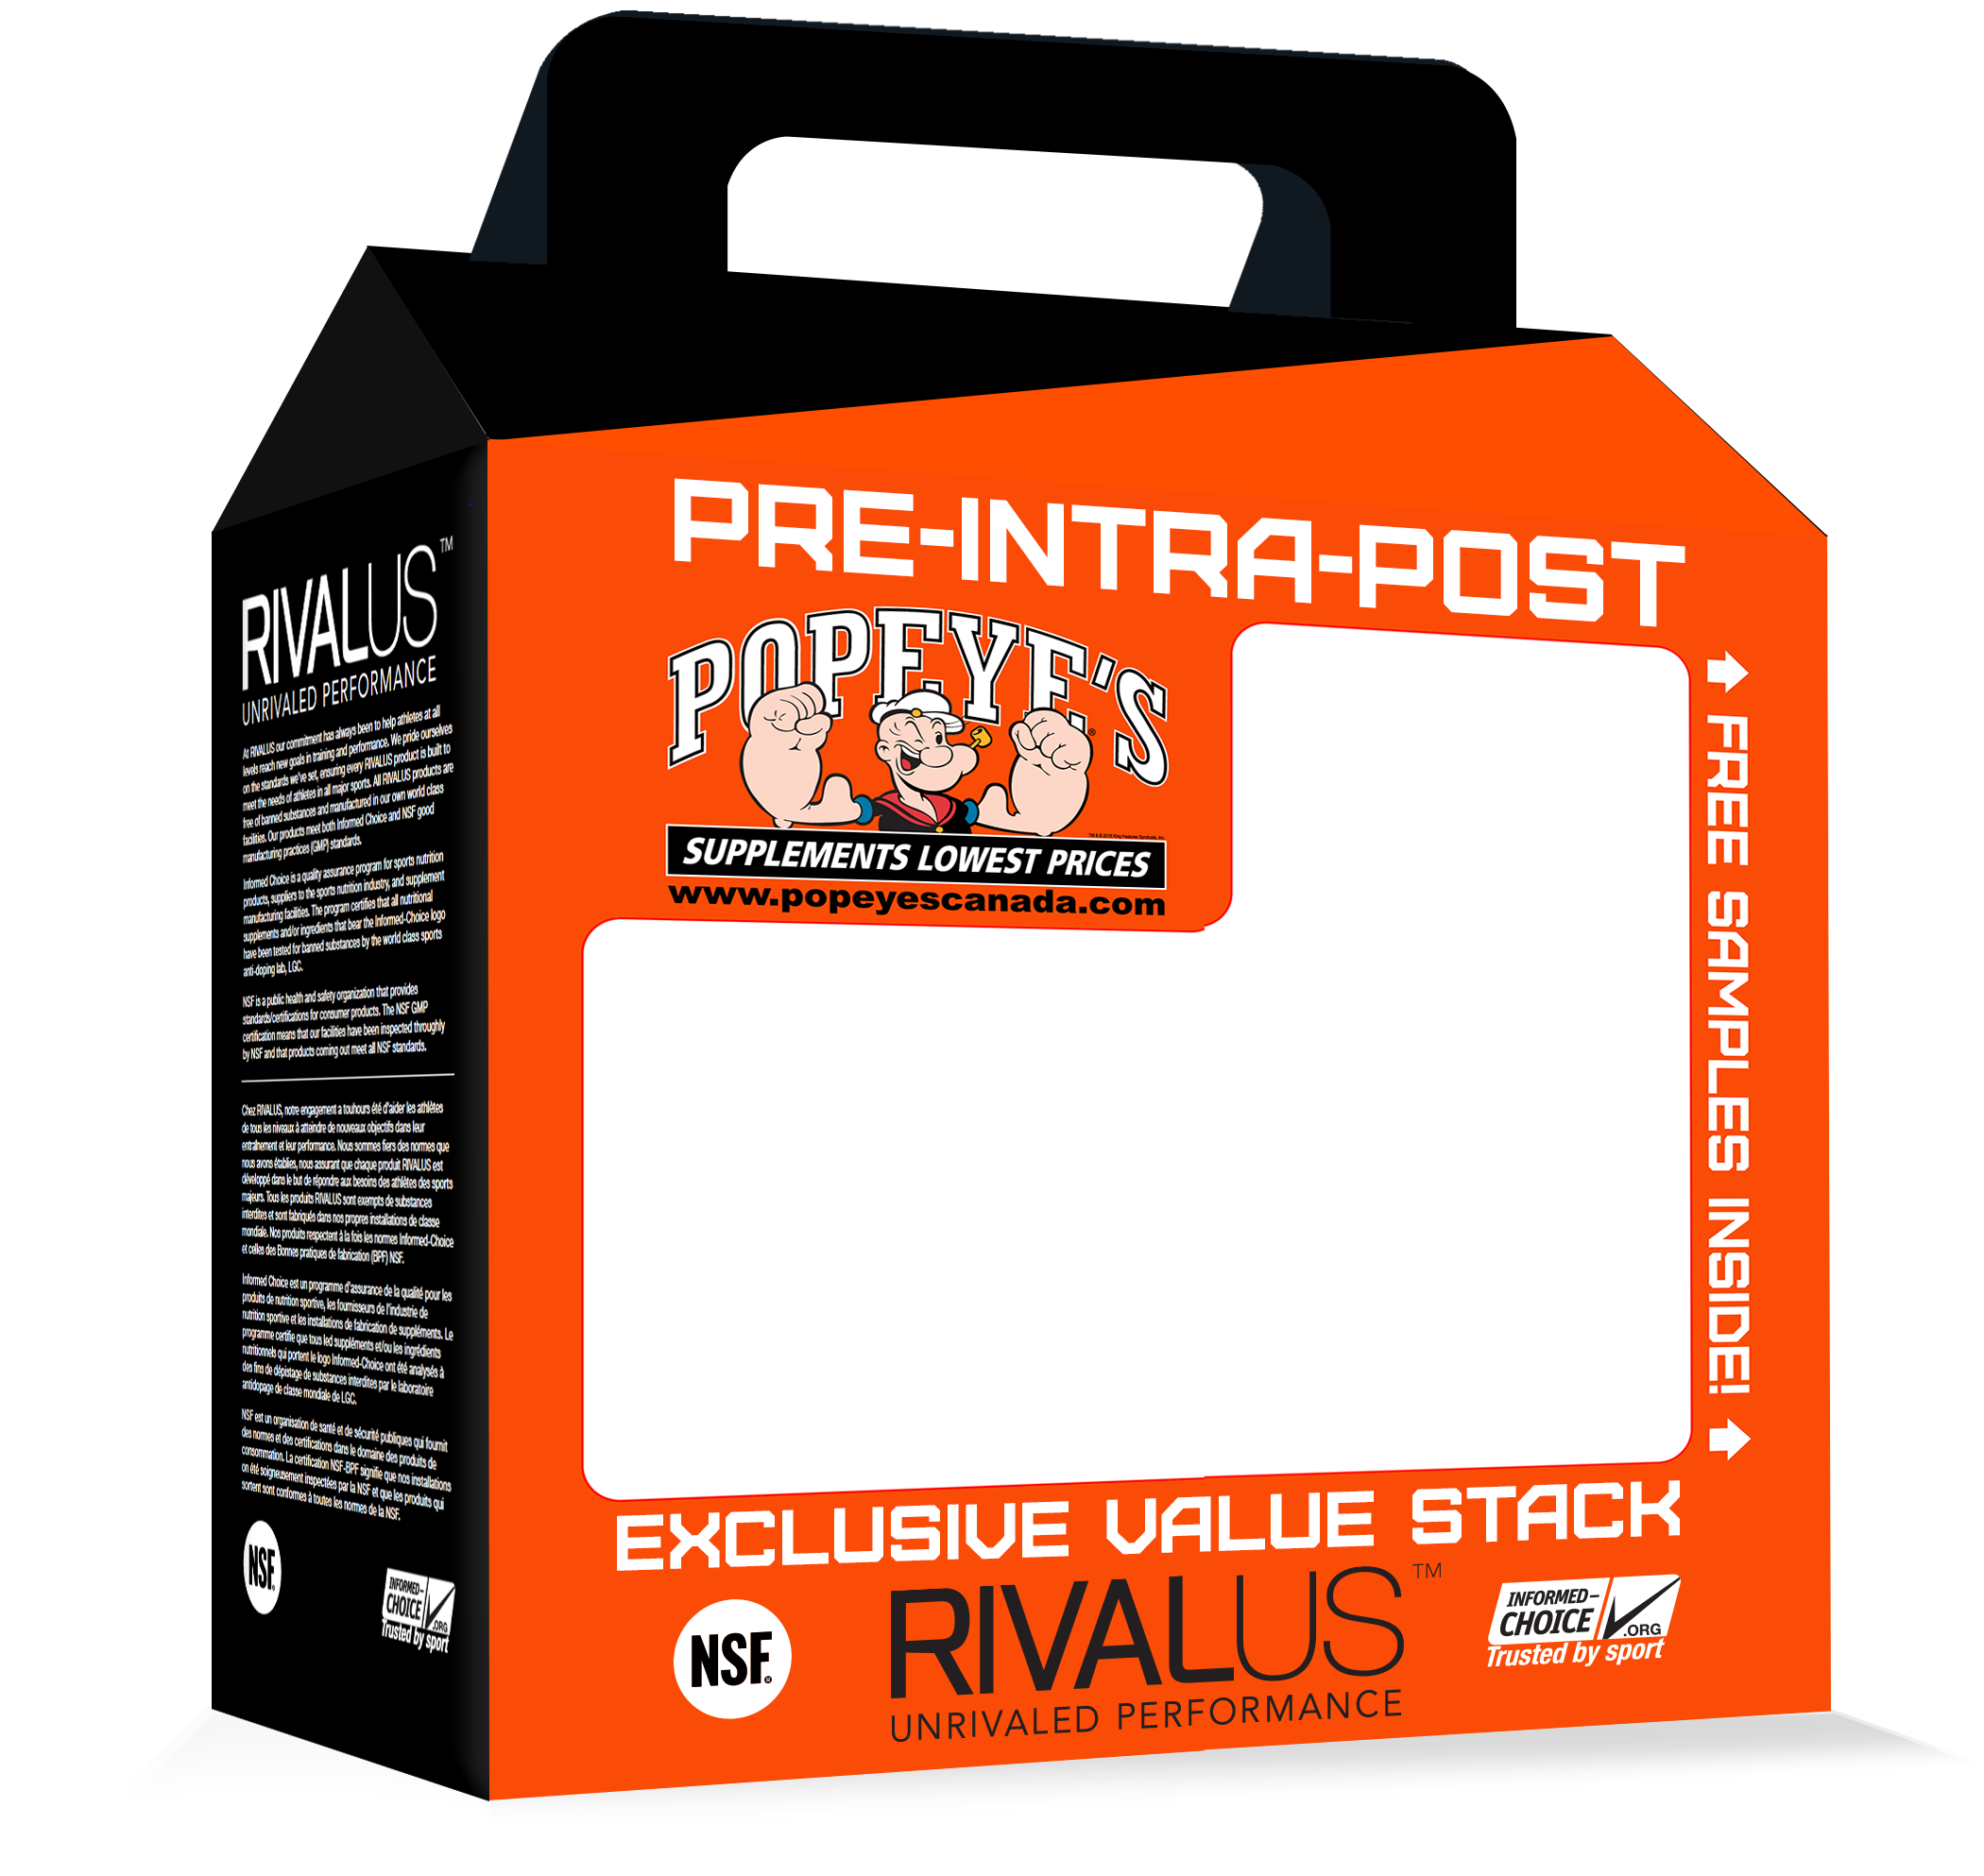   RIVALUS PRE-INTRA-POST STACK DESIGNED FOR POPEYE’S SUPPLEMENT STORES    © RIVALUS CANADA 2016  